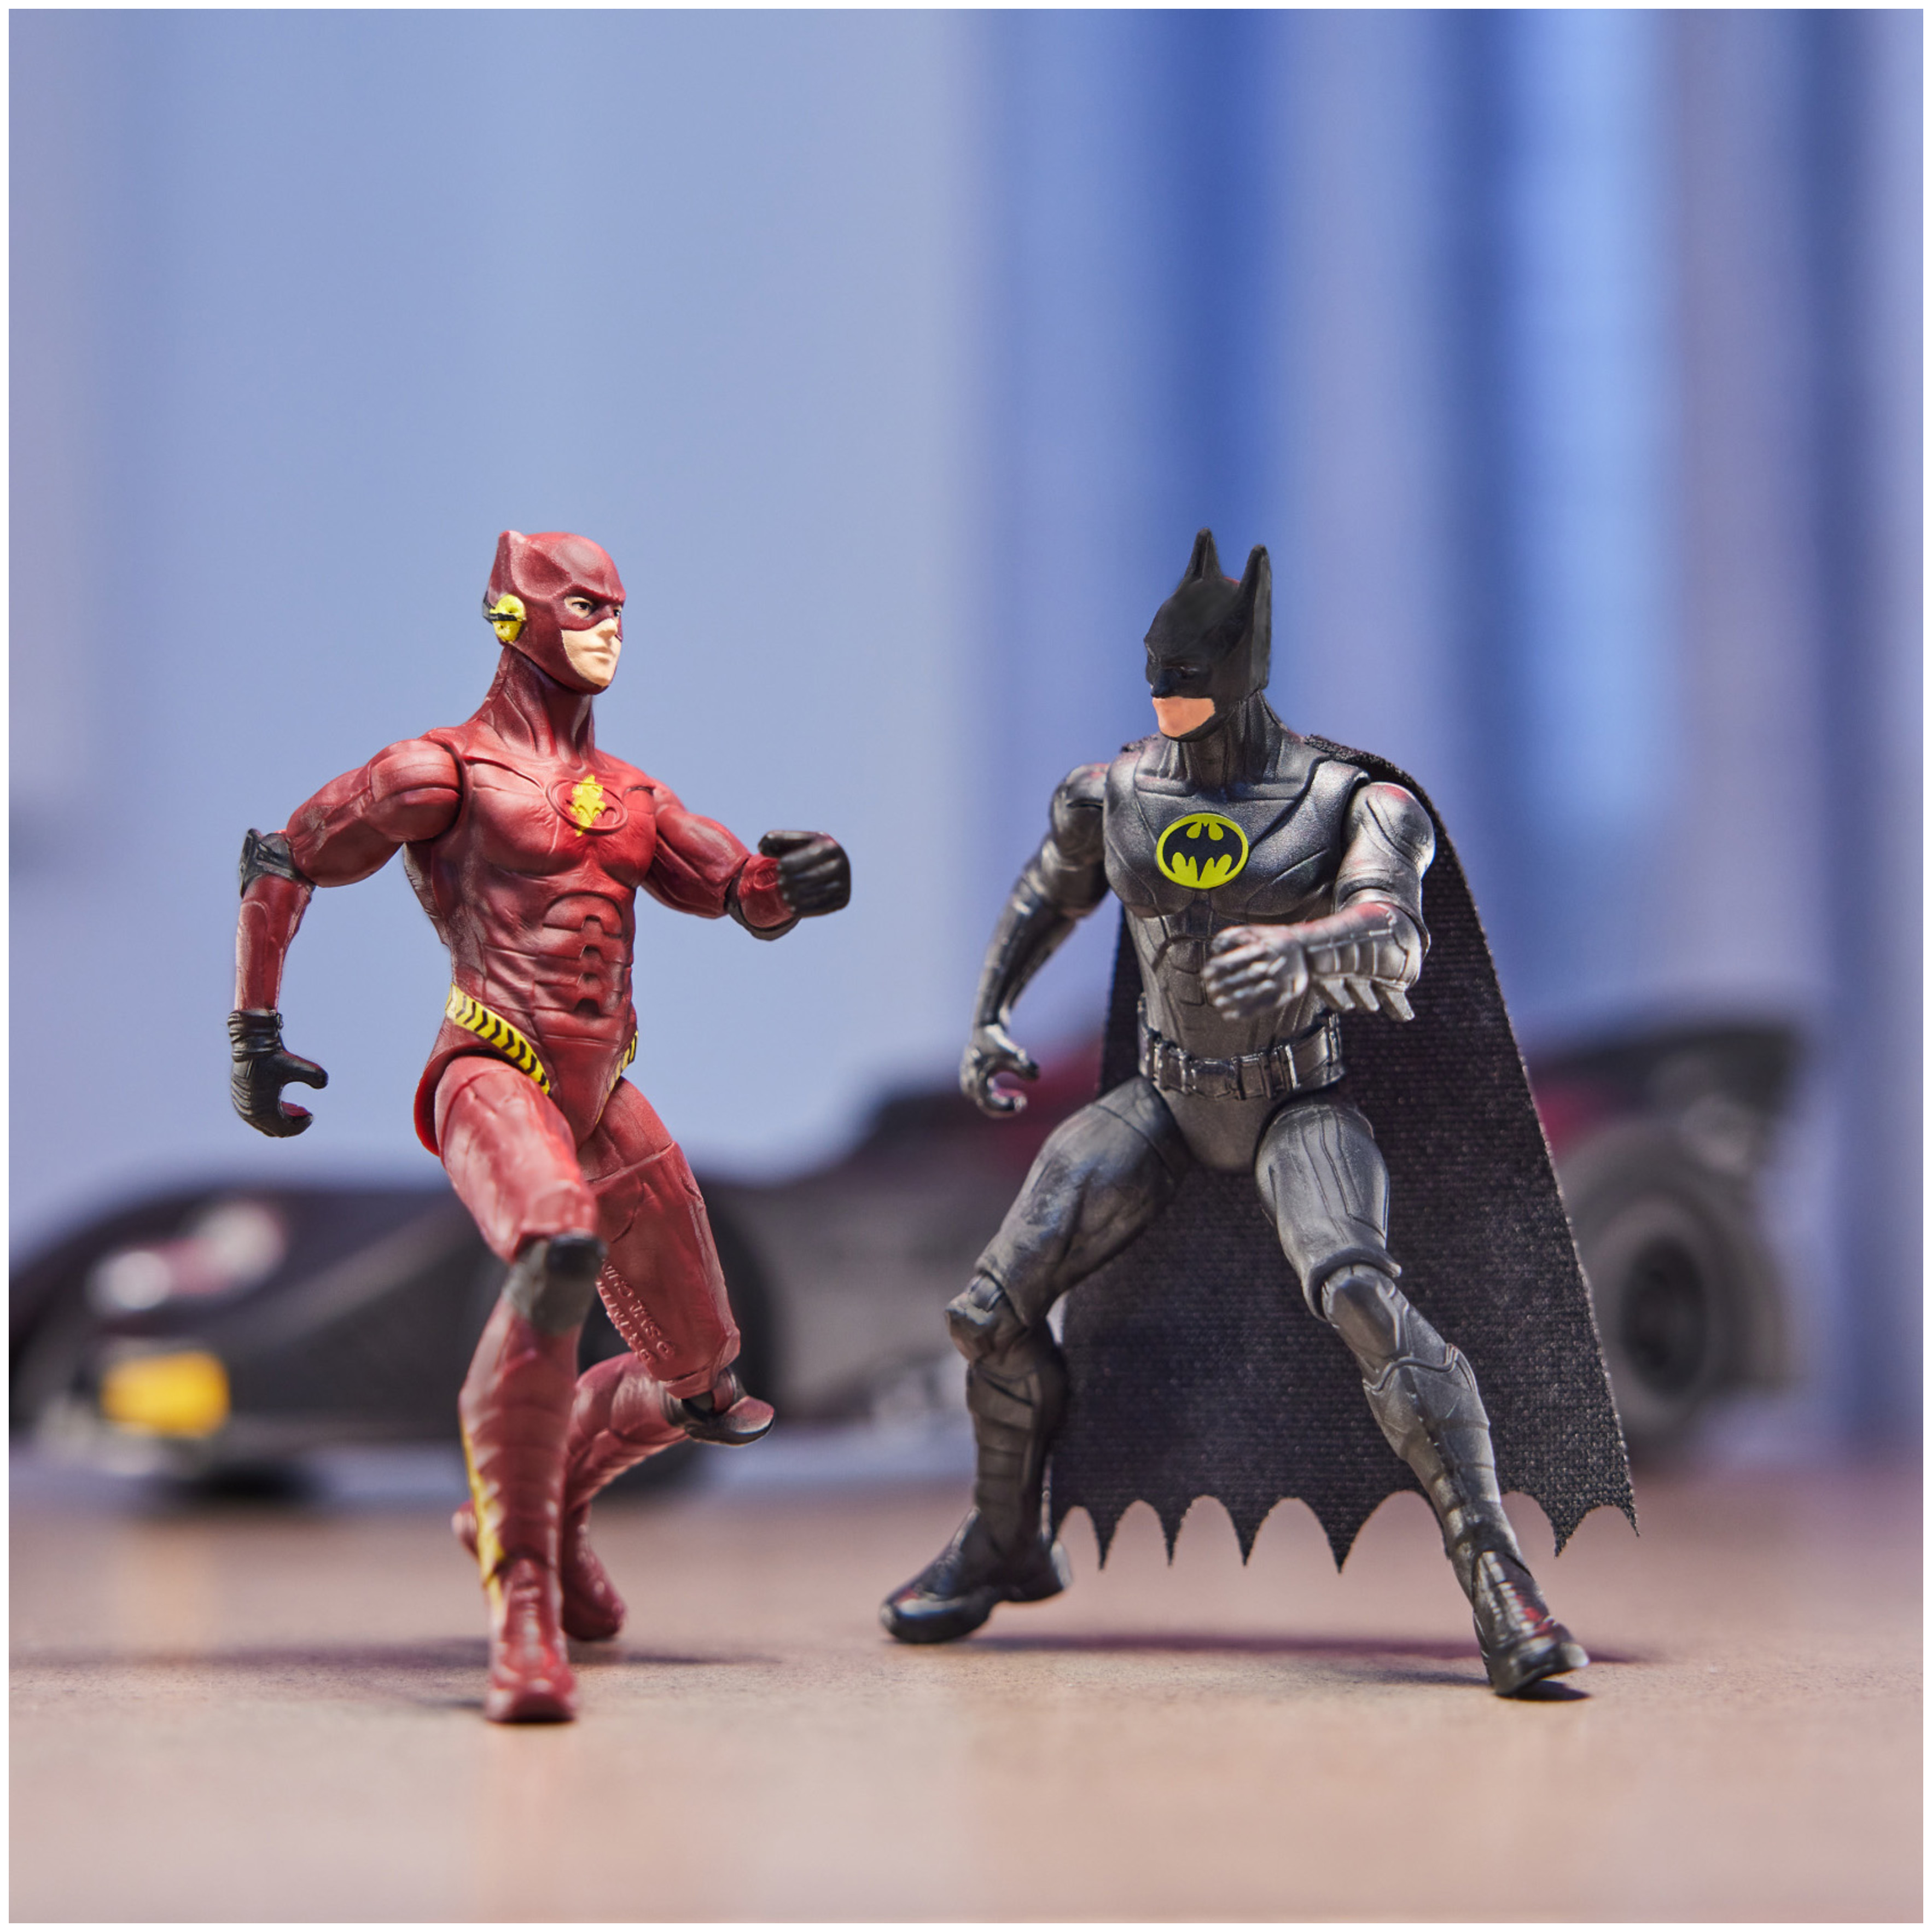 DC Comics: The Flash Batmobile 3-Pack with 2 Figures and Batmobile - image 4 of 8